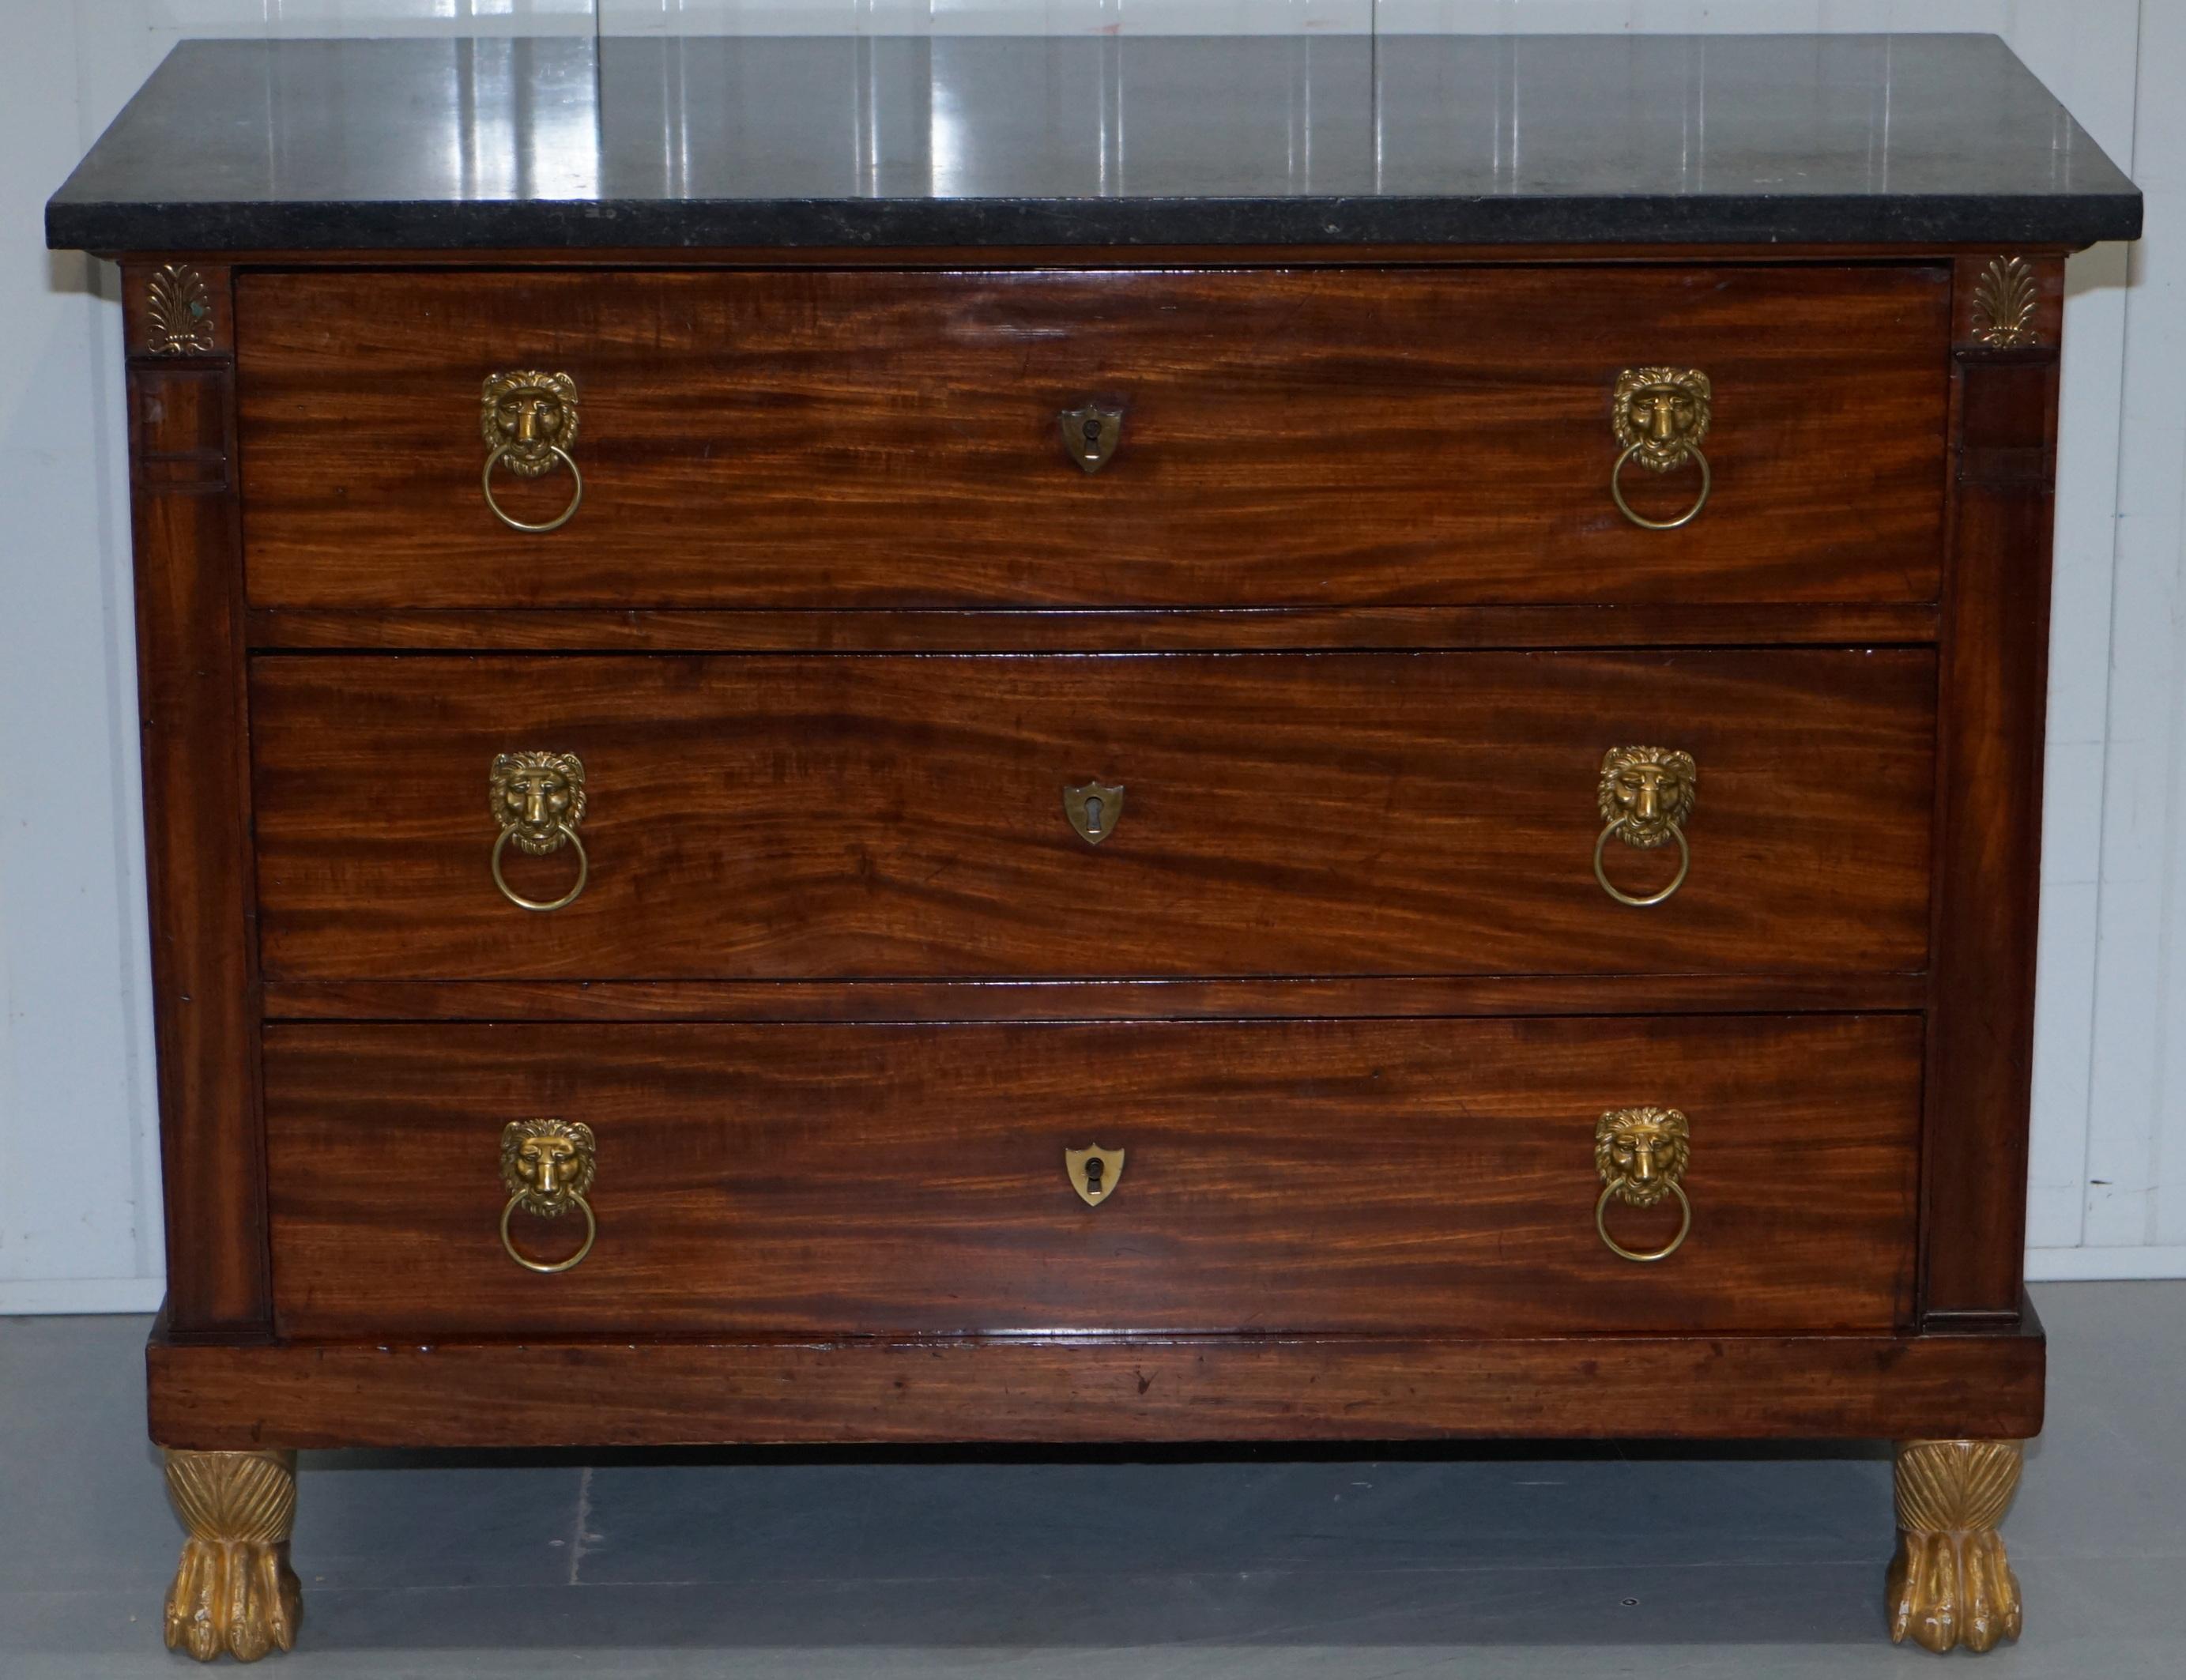 We are delighted to offer for sale this stunning French Empire, circa 1860 solid mahogany chest of drawers with marble top and gold leaf painted lion hairy paw feet

A very good looking well made and decorative piece of furniture. The timber